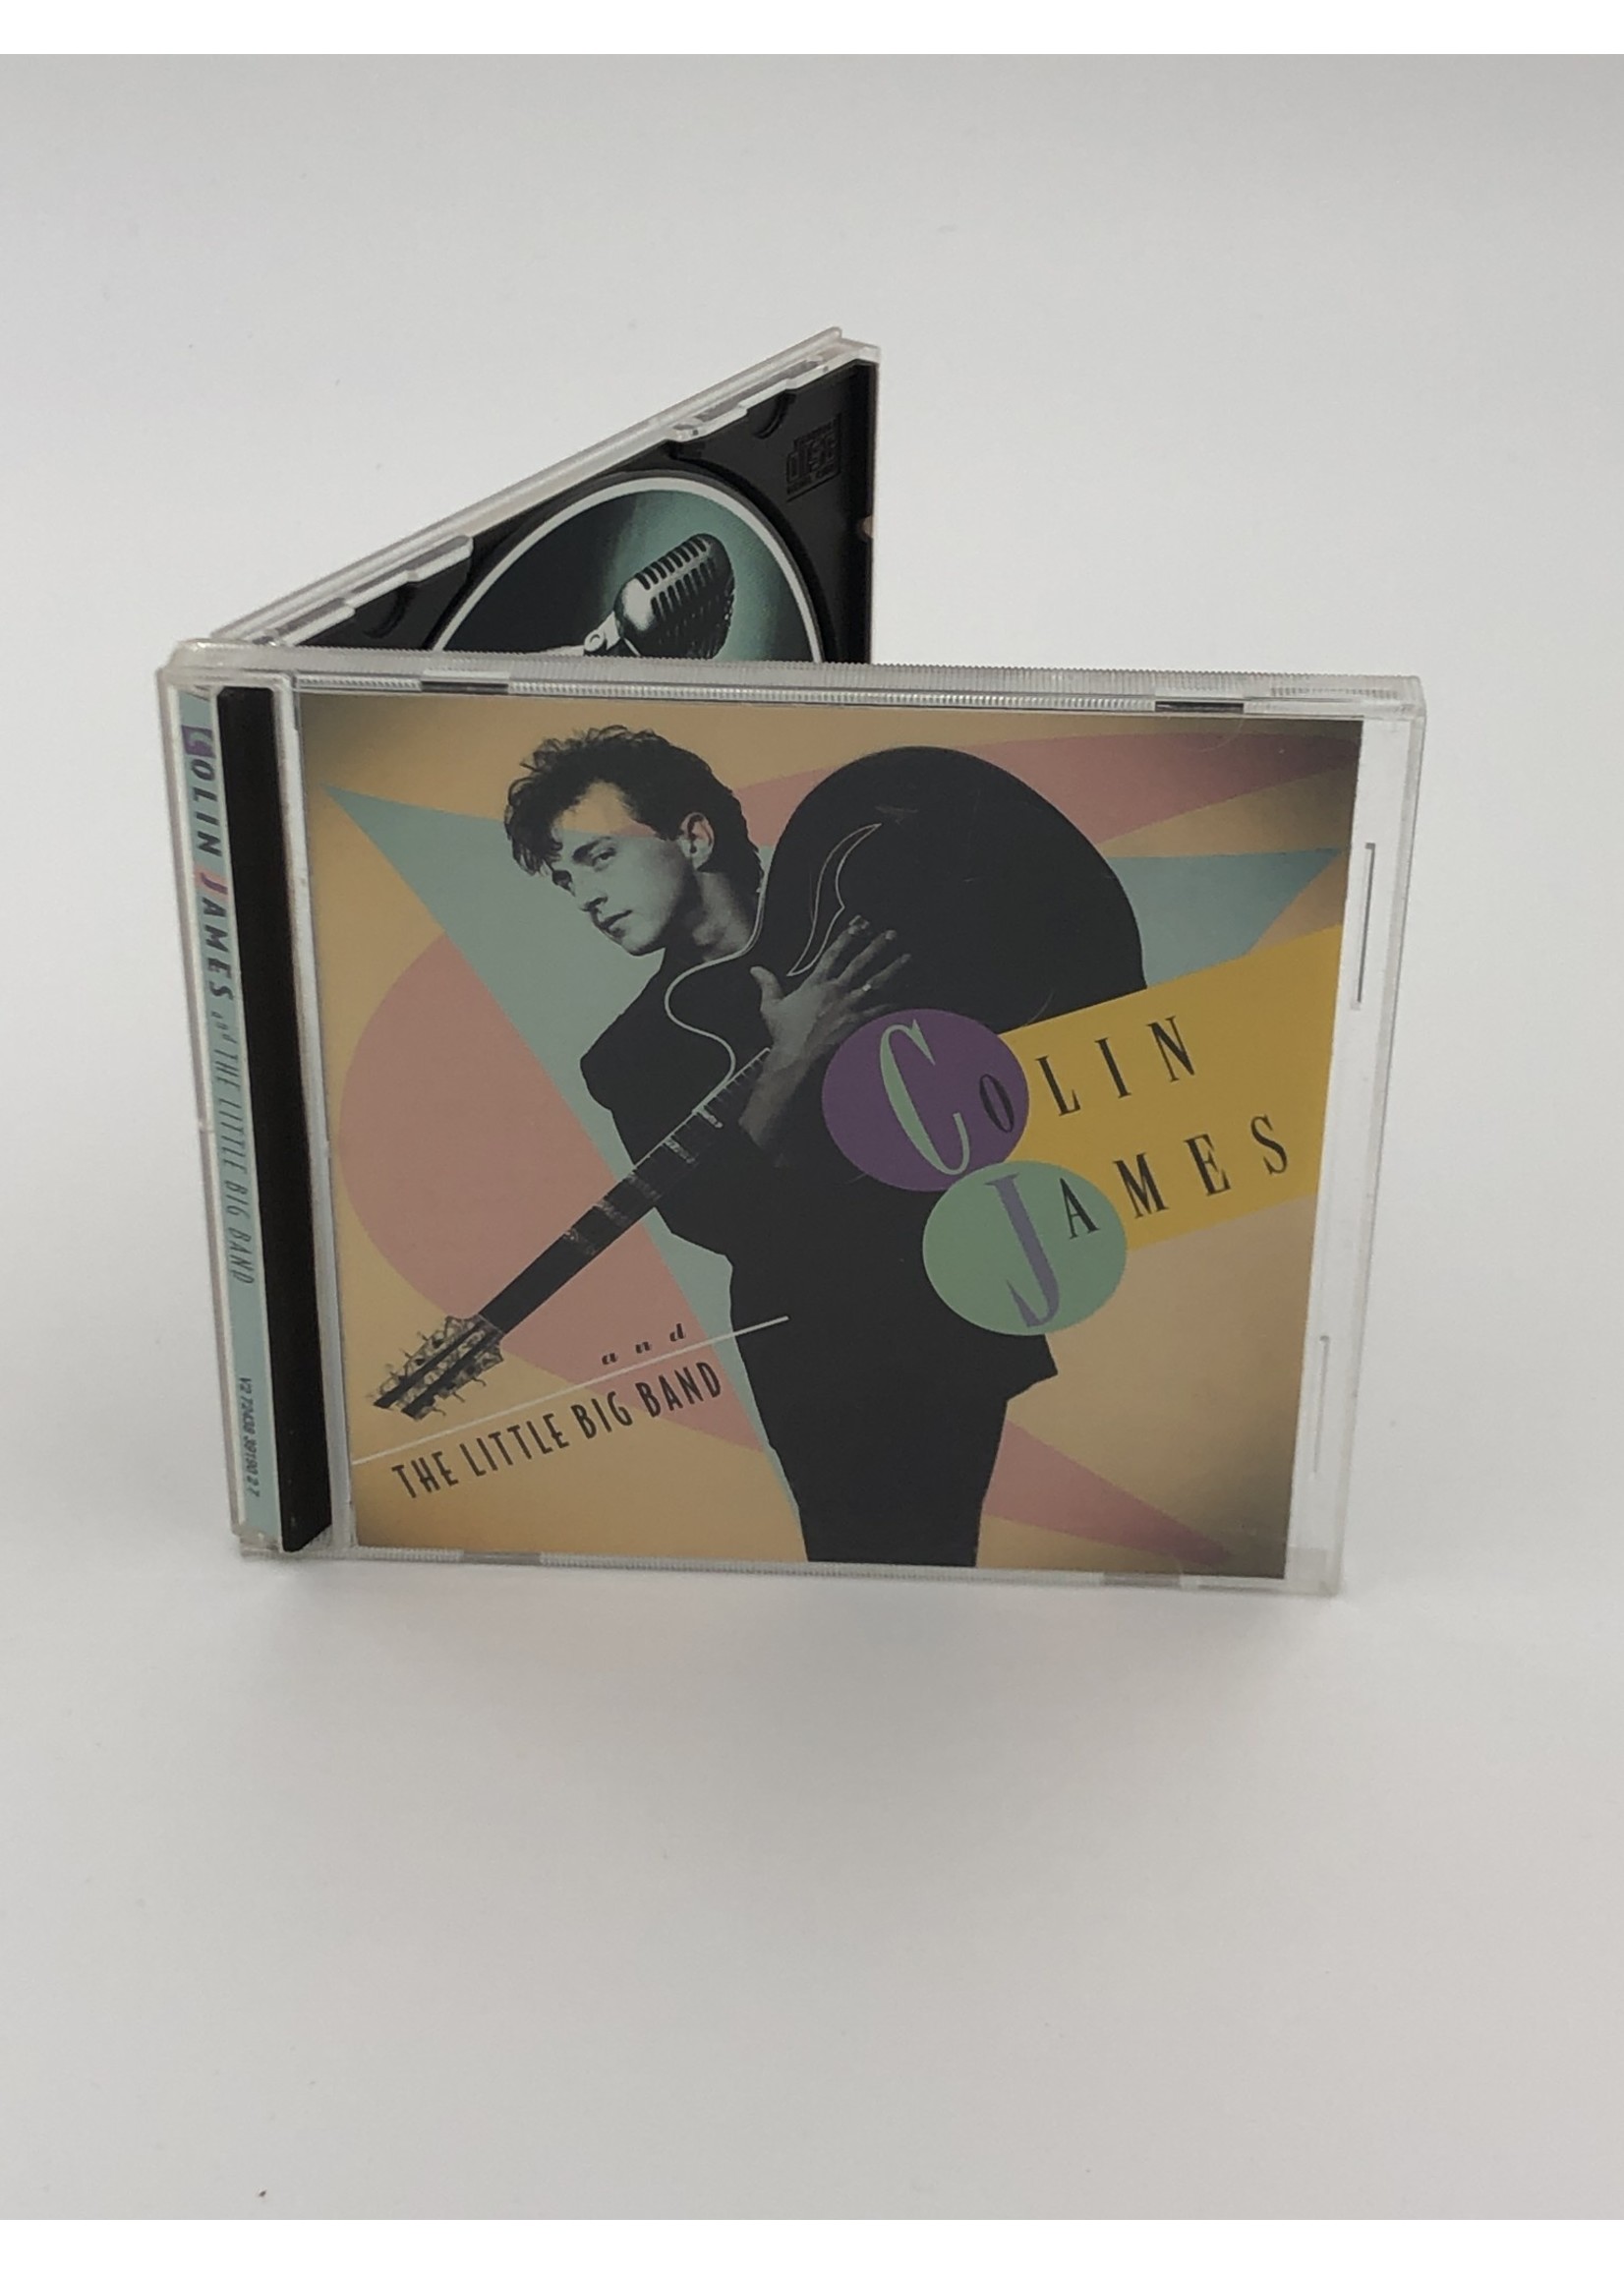 CD Colin James And the Little Big Band CD